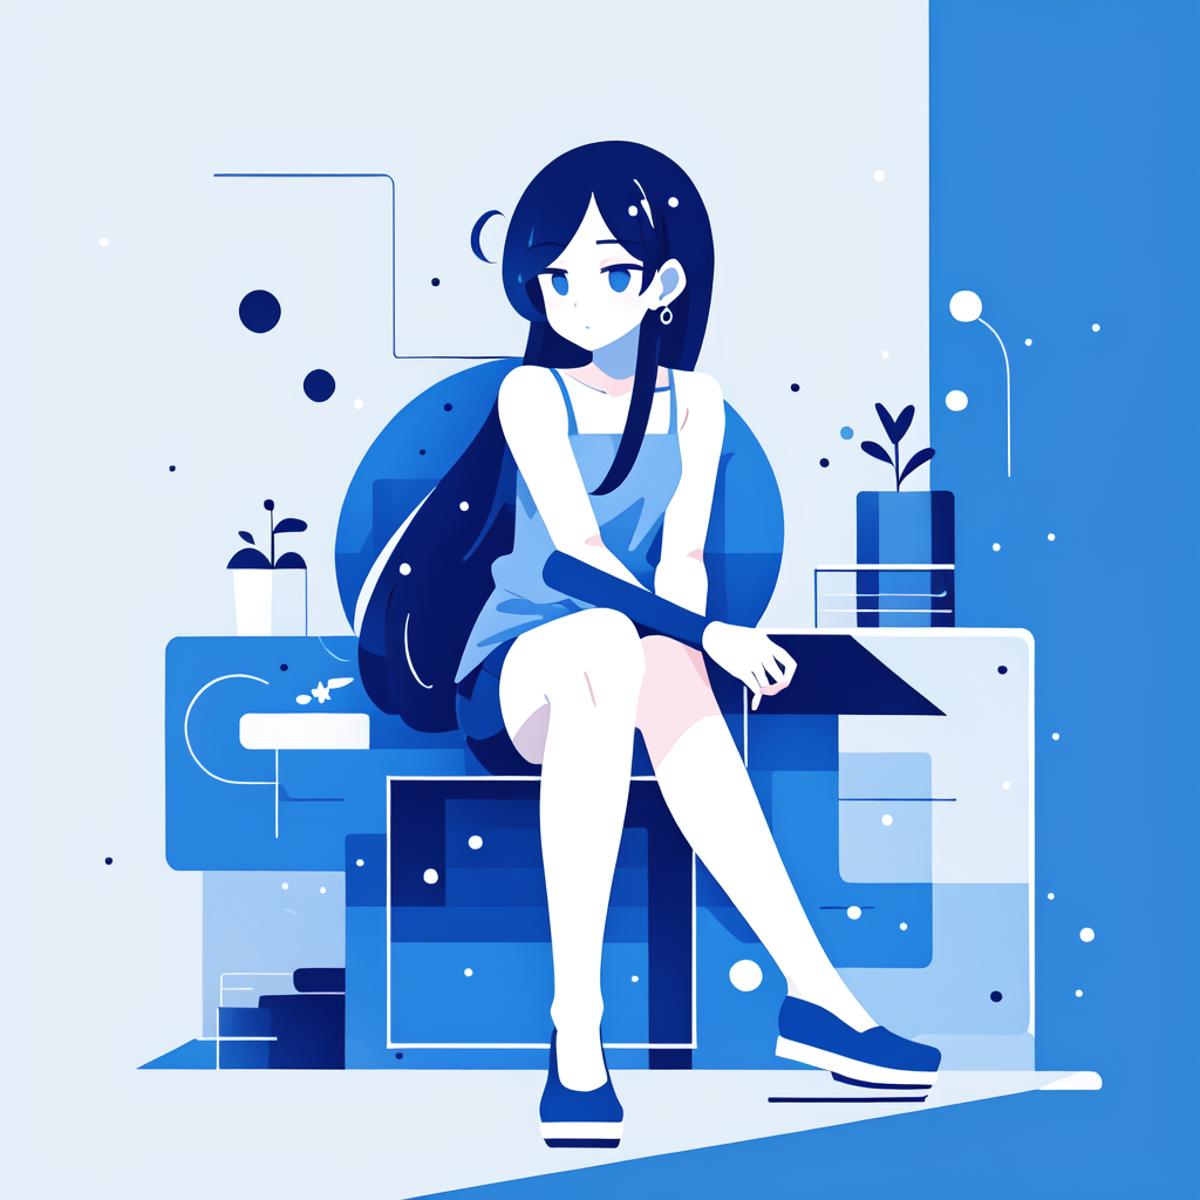 A cute blue girl sitting on a blue chair with her legs crossed.